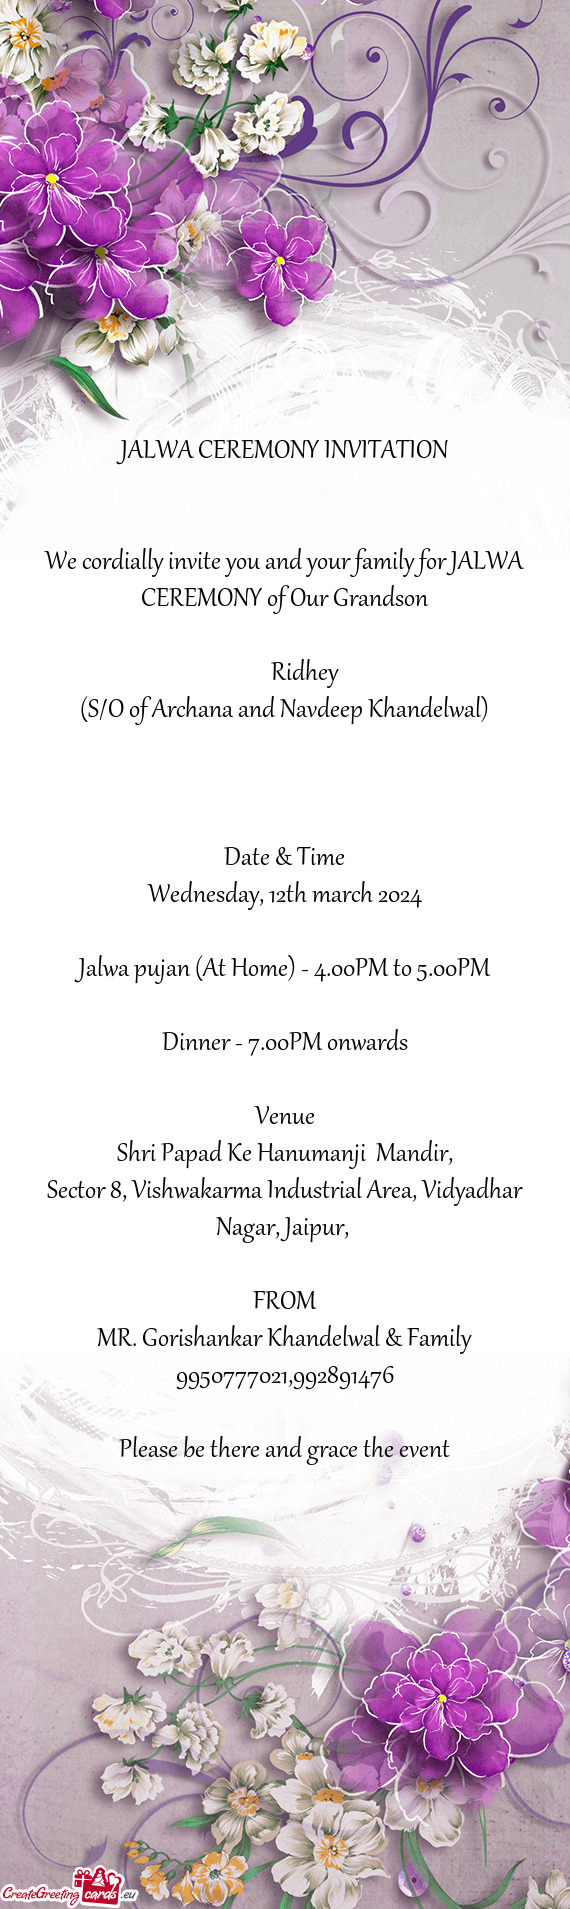 We cordially invite you and your family for JALWA CEREMONY of Our Grandson